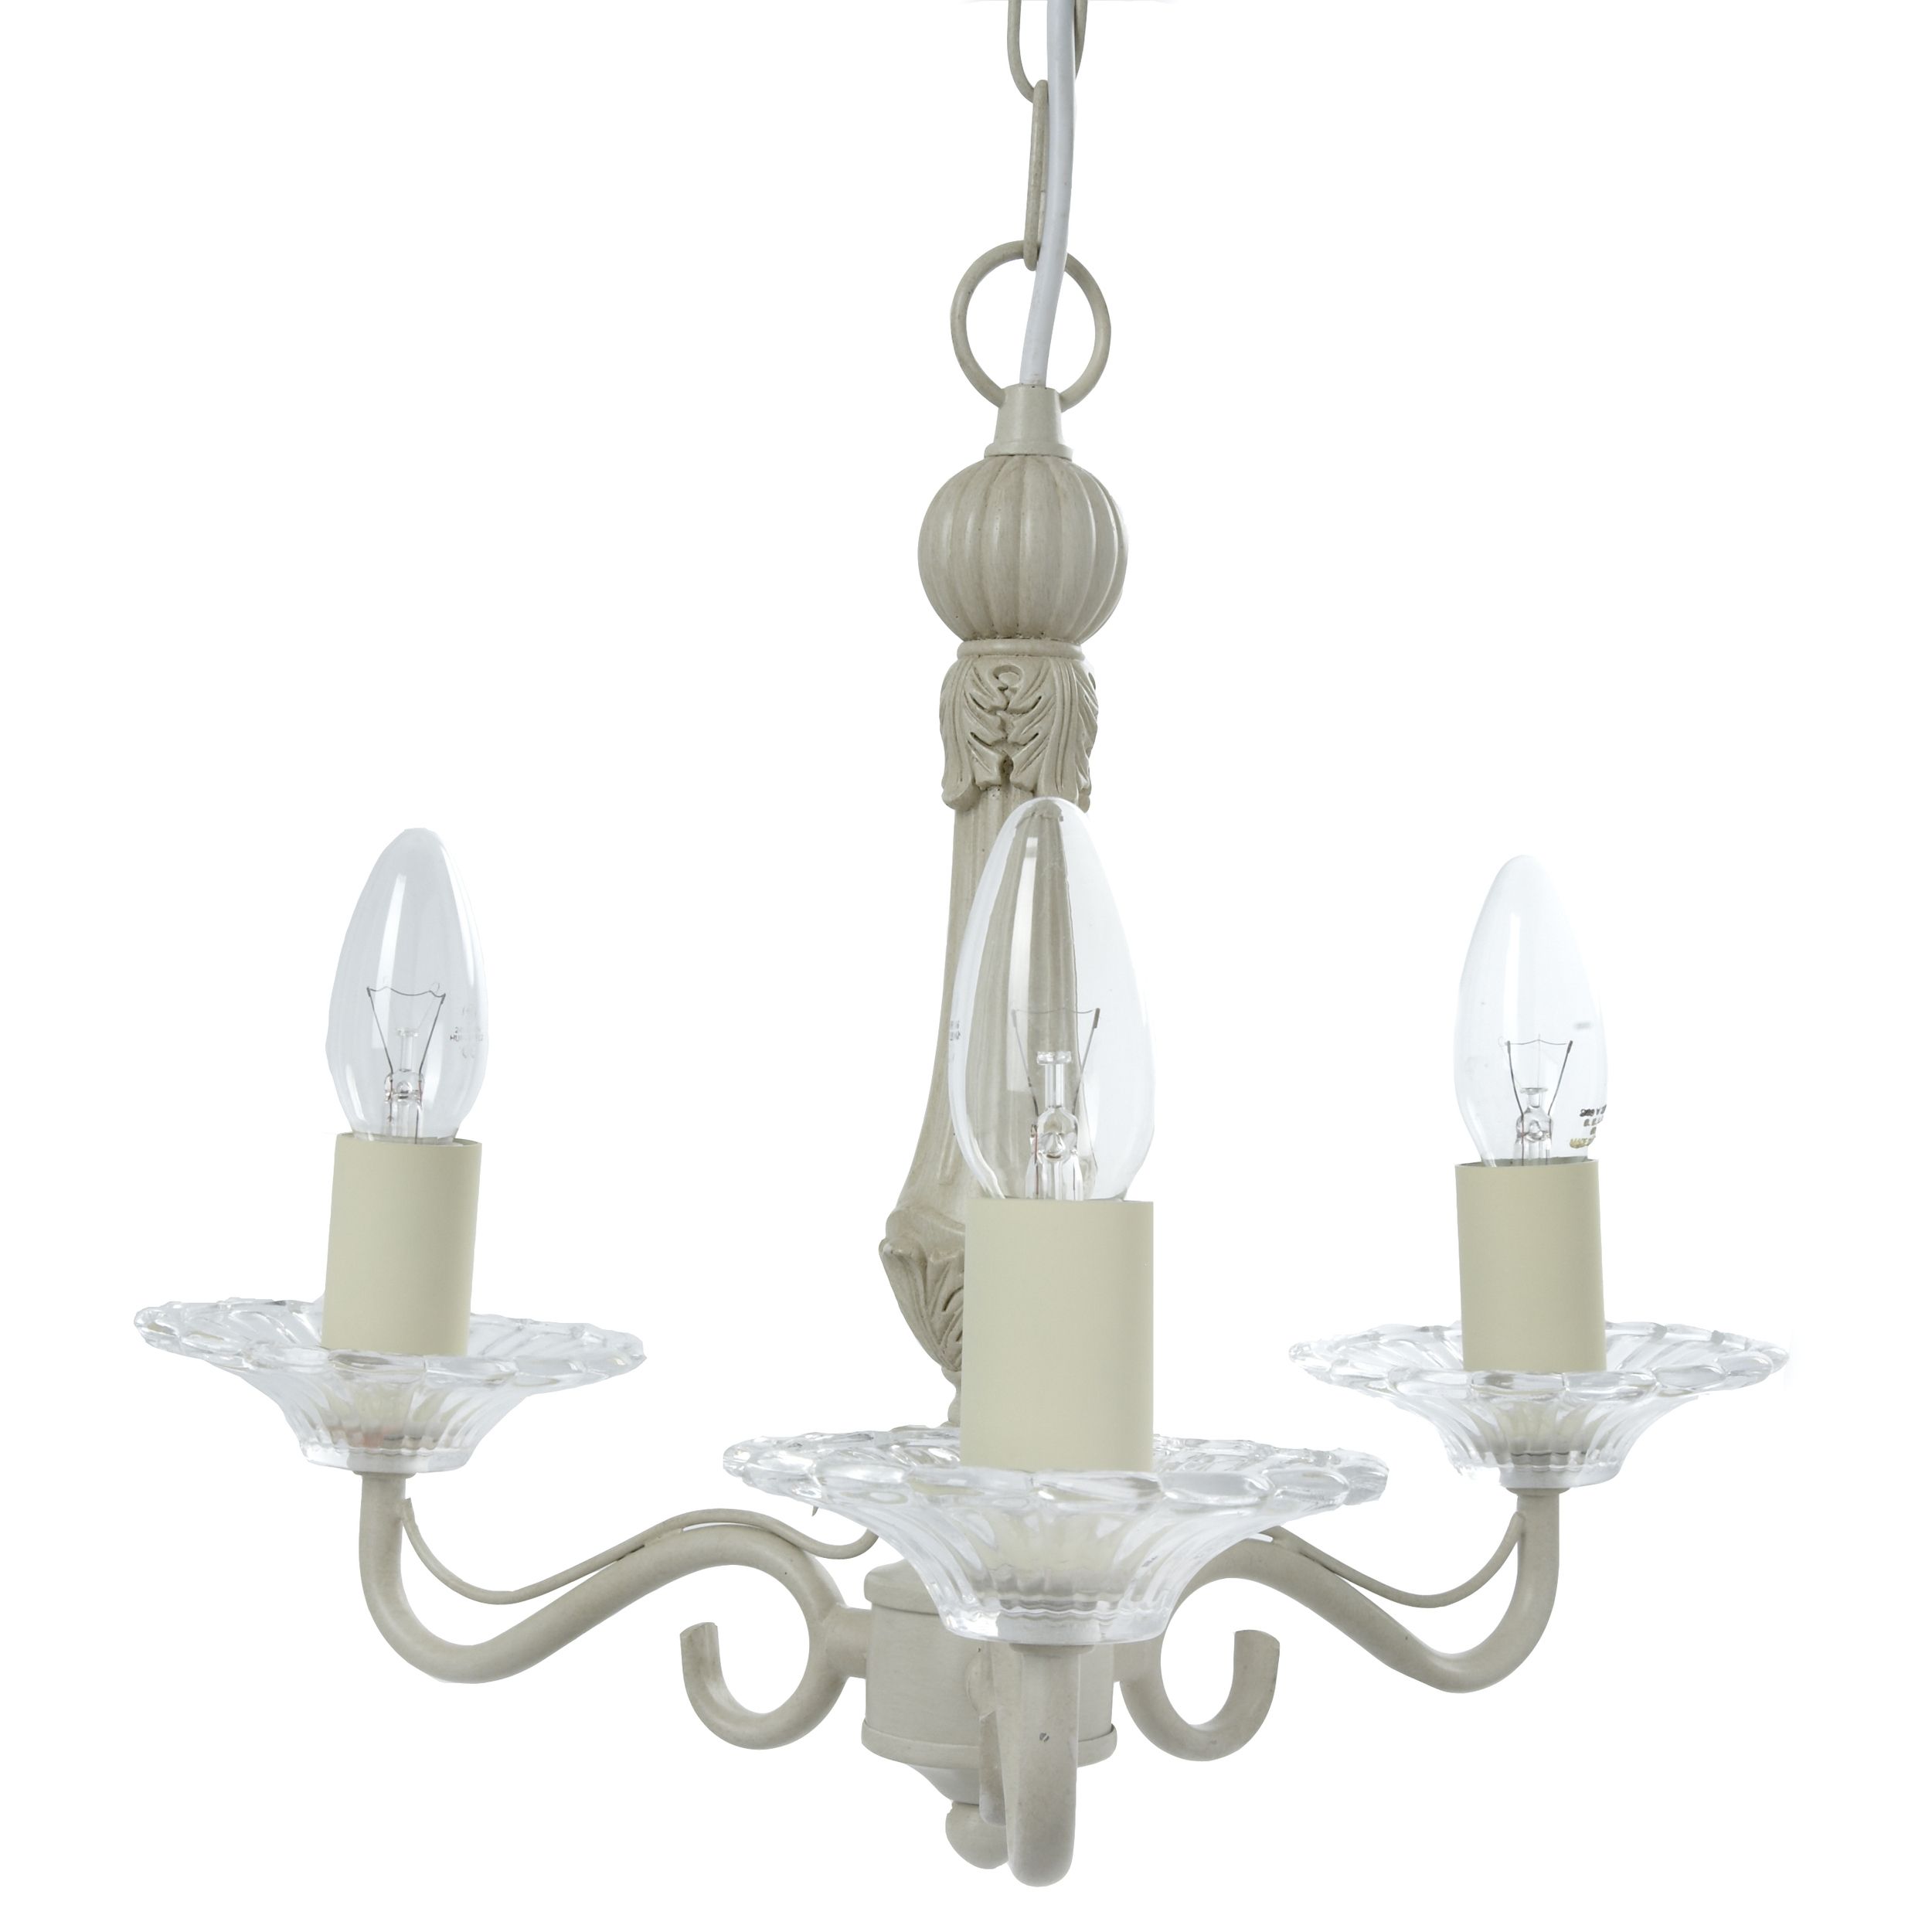 Madley Cream 3 Light Chandelier Lamps Pinterest Laura Ashley With Regard To Cream Chandelier Lights (View 11 of 12)